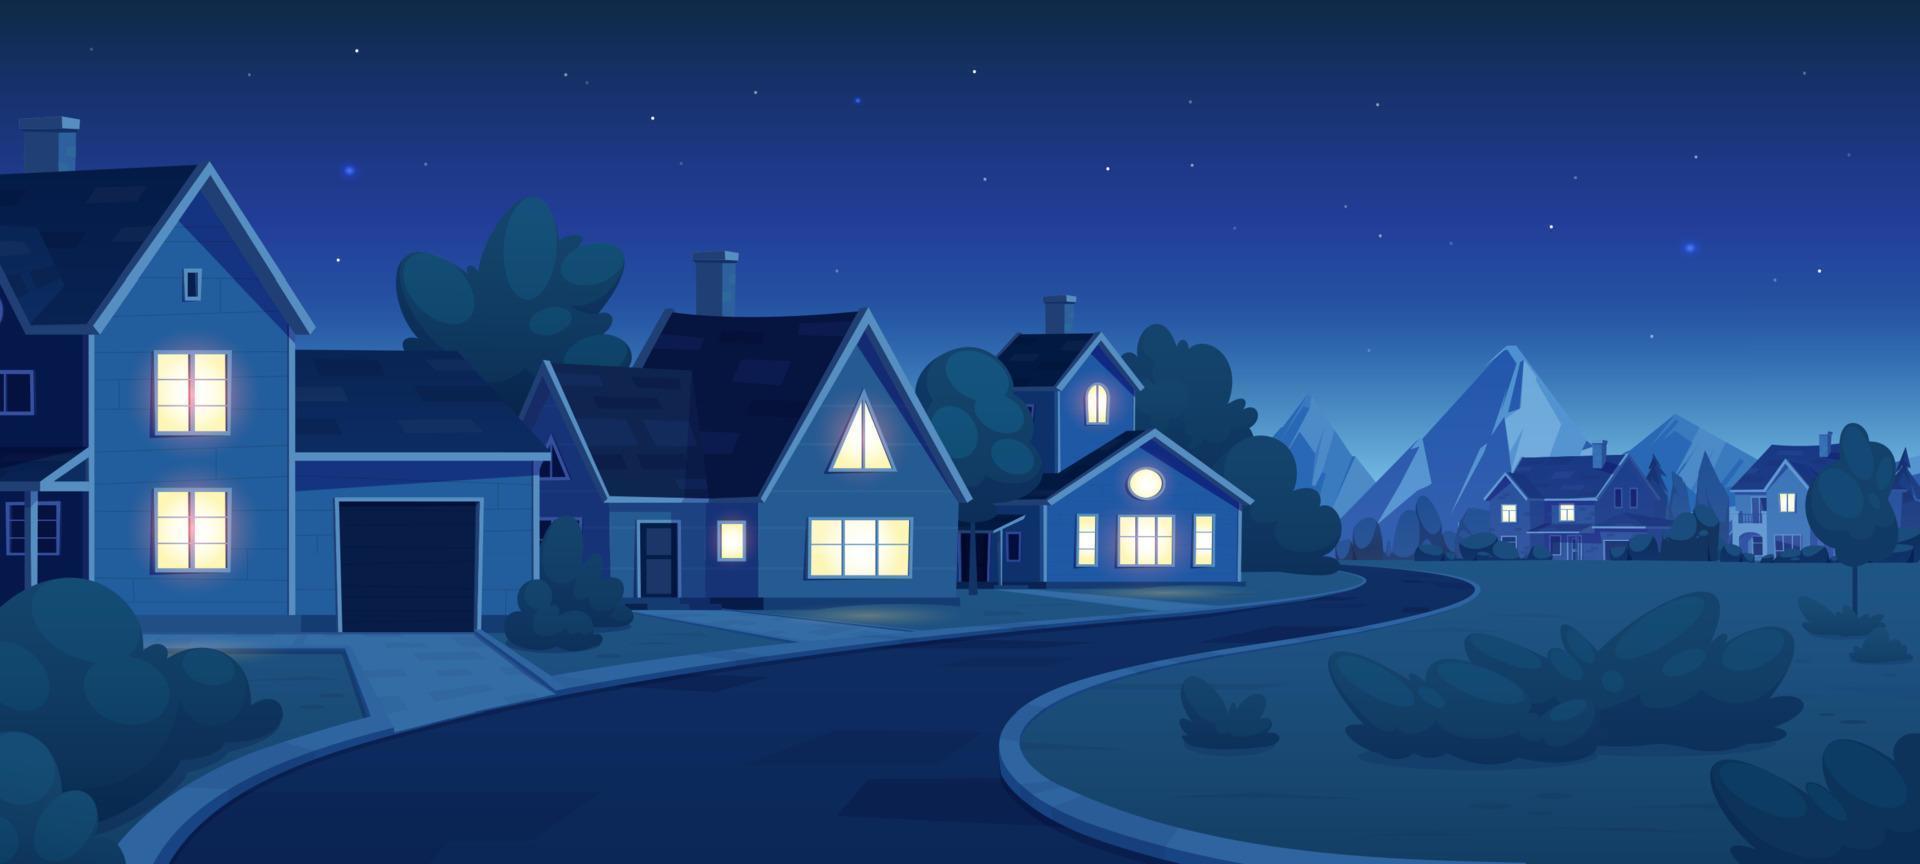 Night empty suburban street with house landscape vector